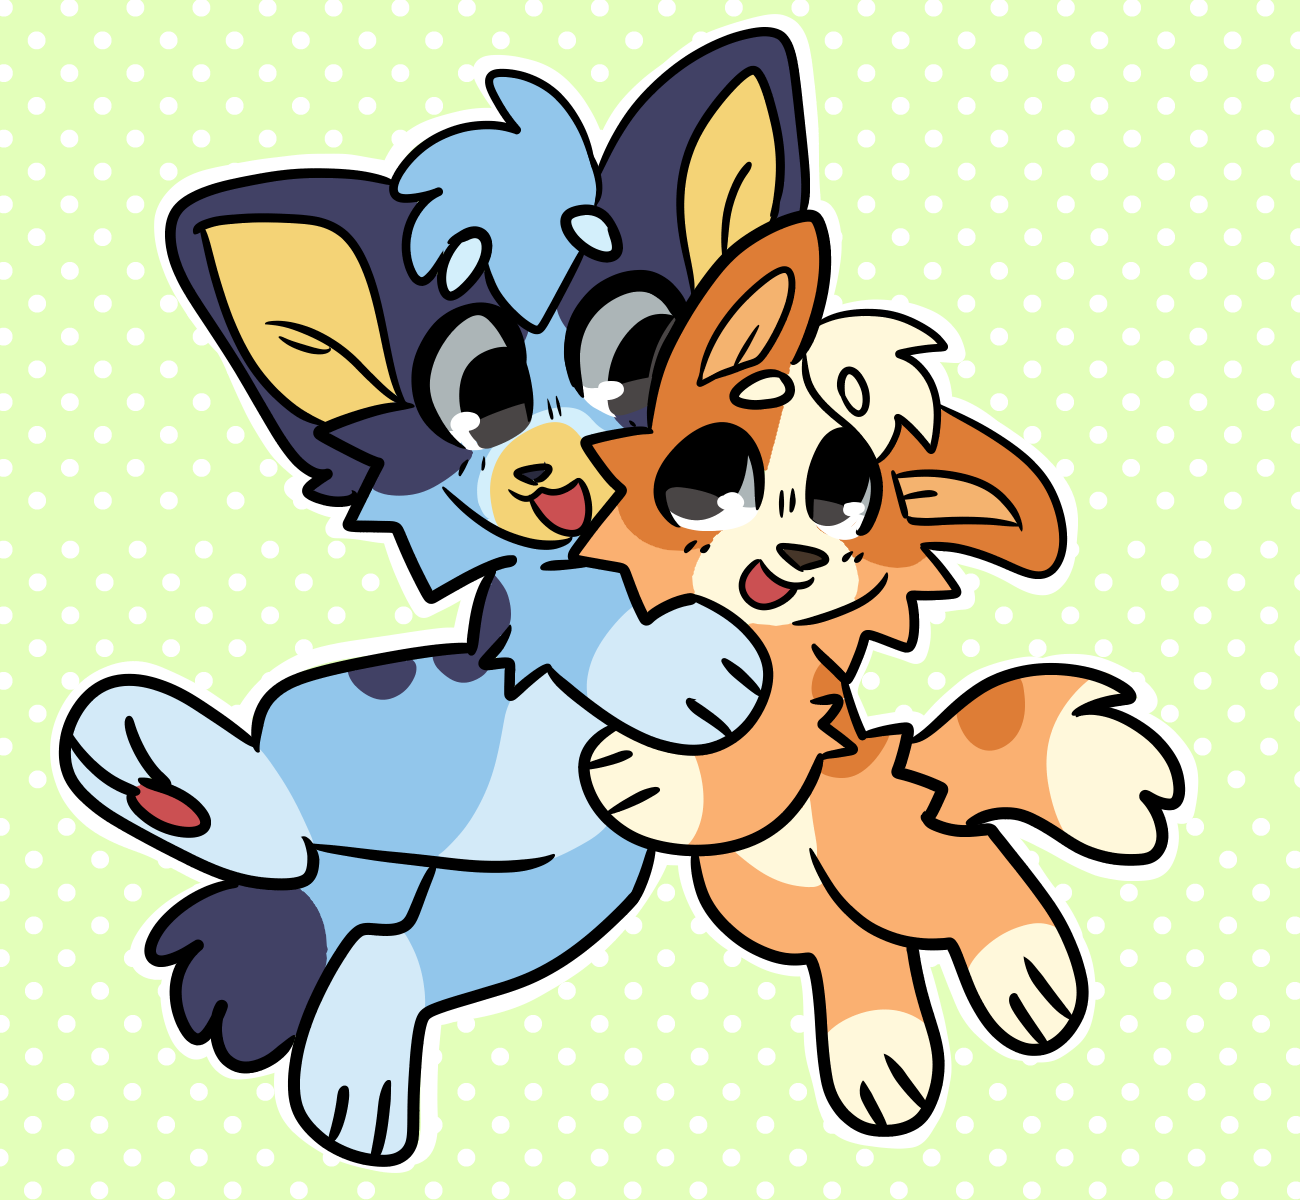 Bluey and Bingo (October 2019) by ToonThick -- Fur Affinity [dot] net